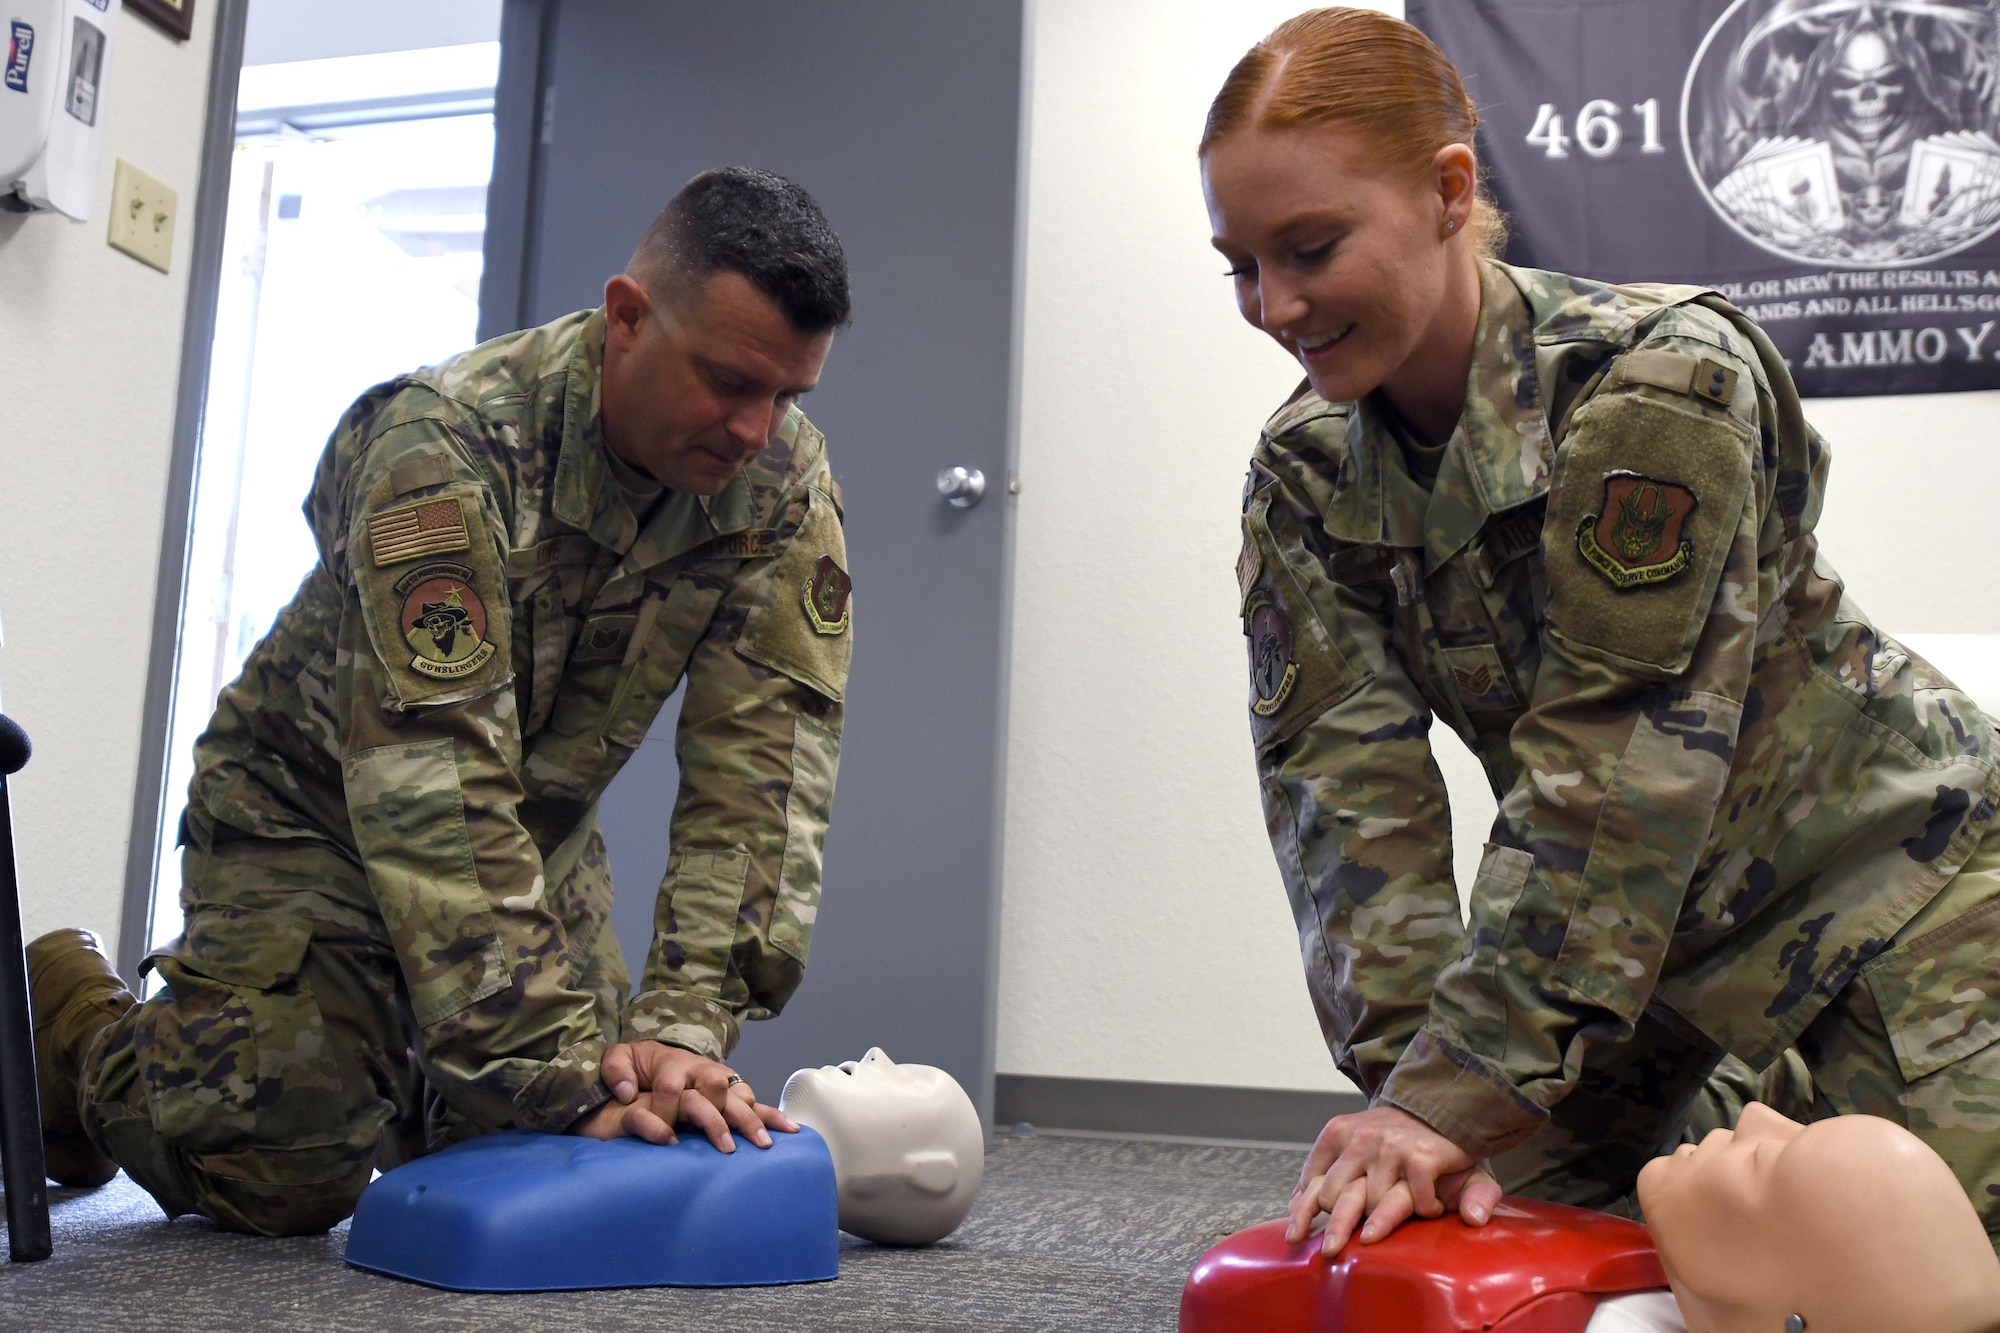 U.S. Air Force Staff Sgt. Kristy Riley, 924th Maintenance Squadron Munitions Flight combat plans training supervisor, teaches proper CPR procedures at Davis-Monthan Air Force Base, Arizona, July 23, 2021. Riley was named one of the Air Force’s 12 Outstanding Airmen of the Year and was recently nominated for the Air Force Sergeants Association's Pitsenbarger Award. (U.S. Air Force photo by Staff Sgt. Blake Gonzales)